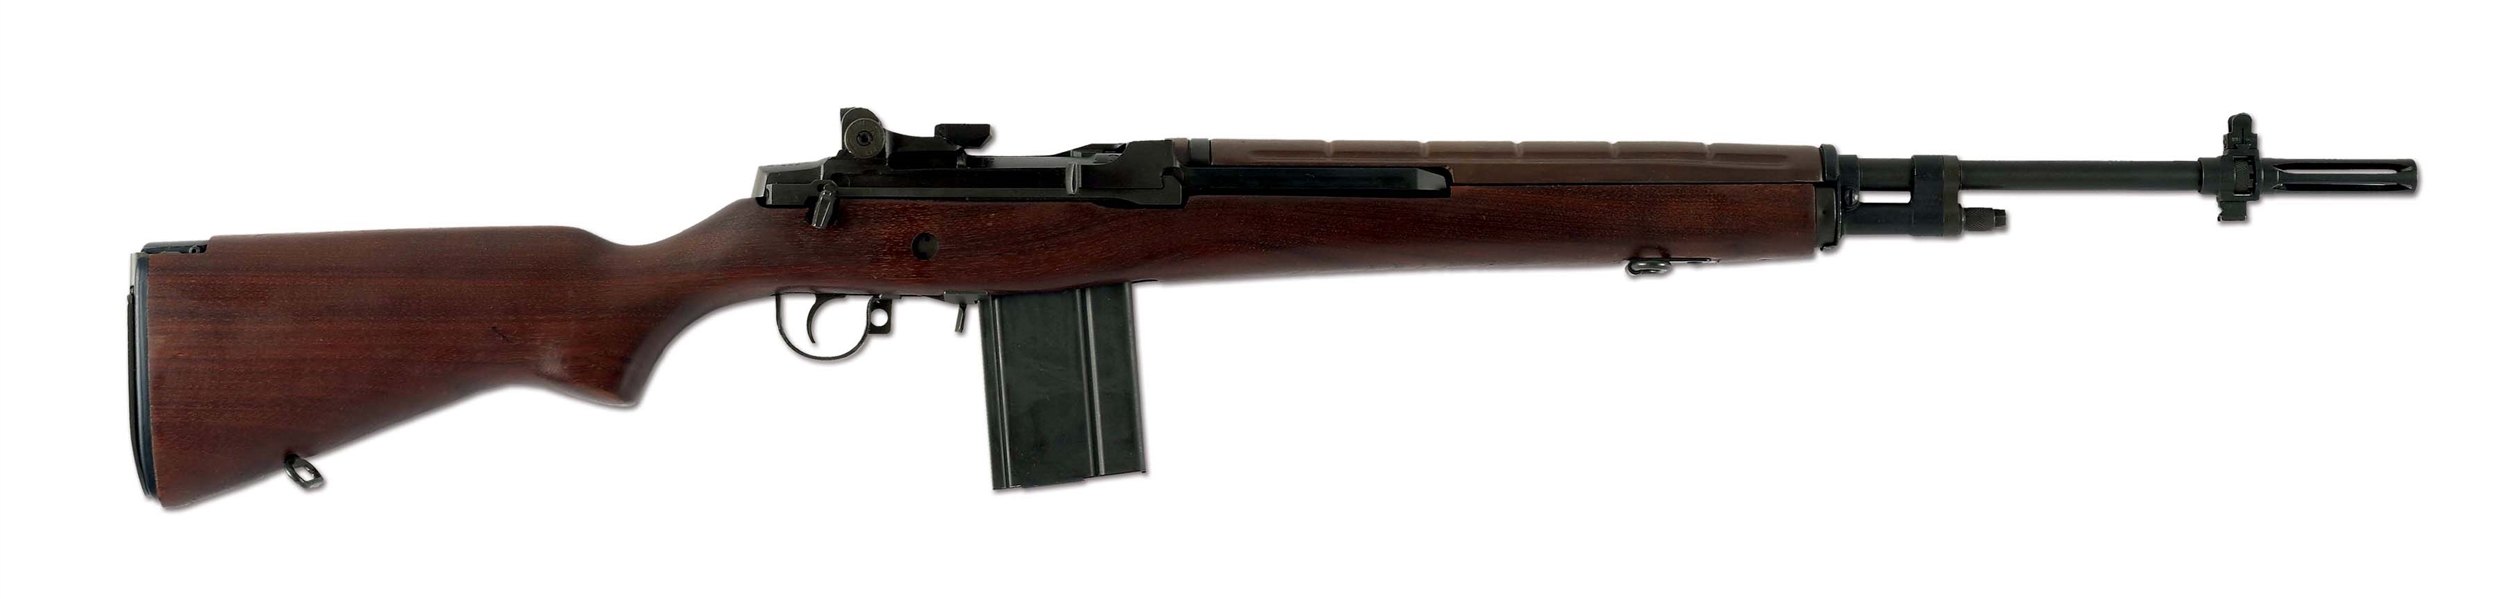 (N) HIGH CONDITION SPRINGFIELD ARMORY M1A (M14) MACHINE GUN WITH ORIGINAL BOX (FULLY TRANSFERABLE).